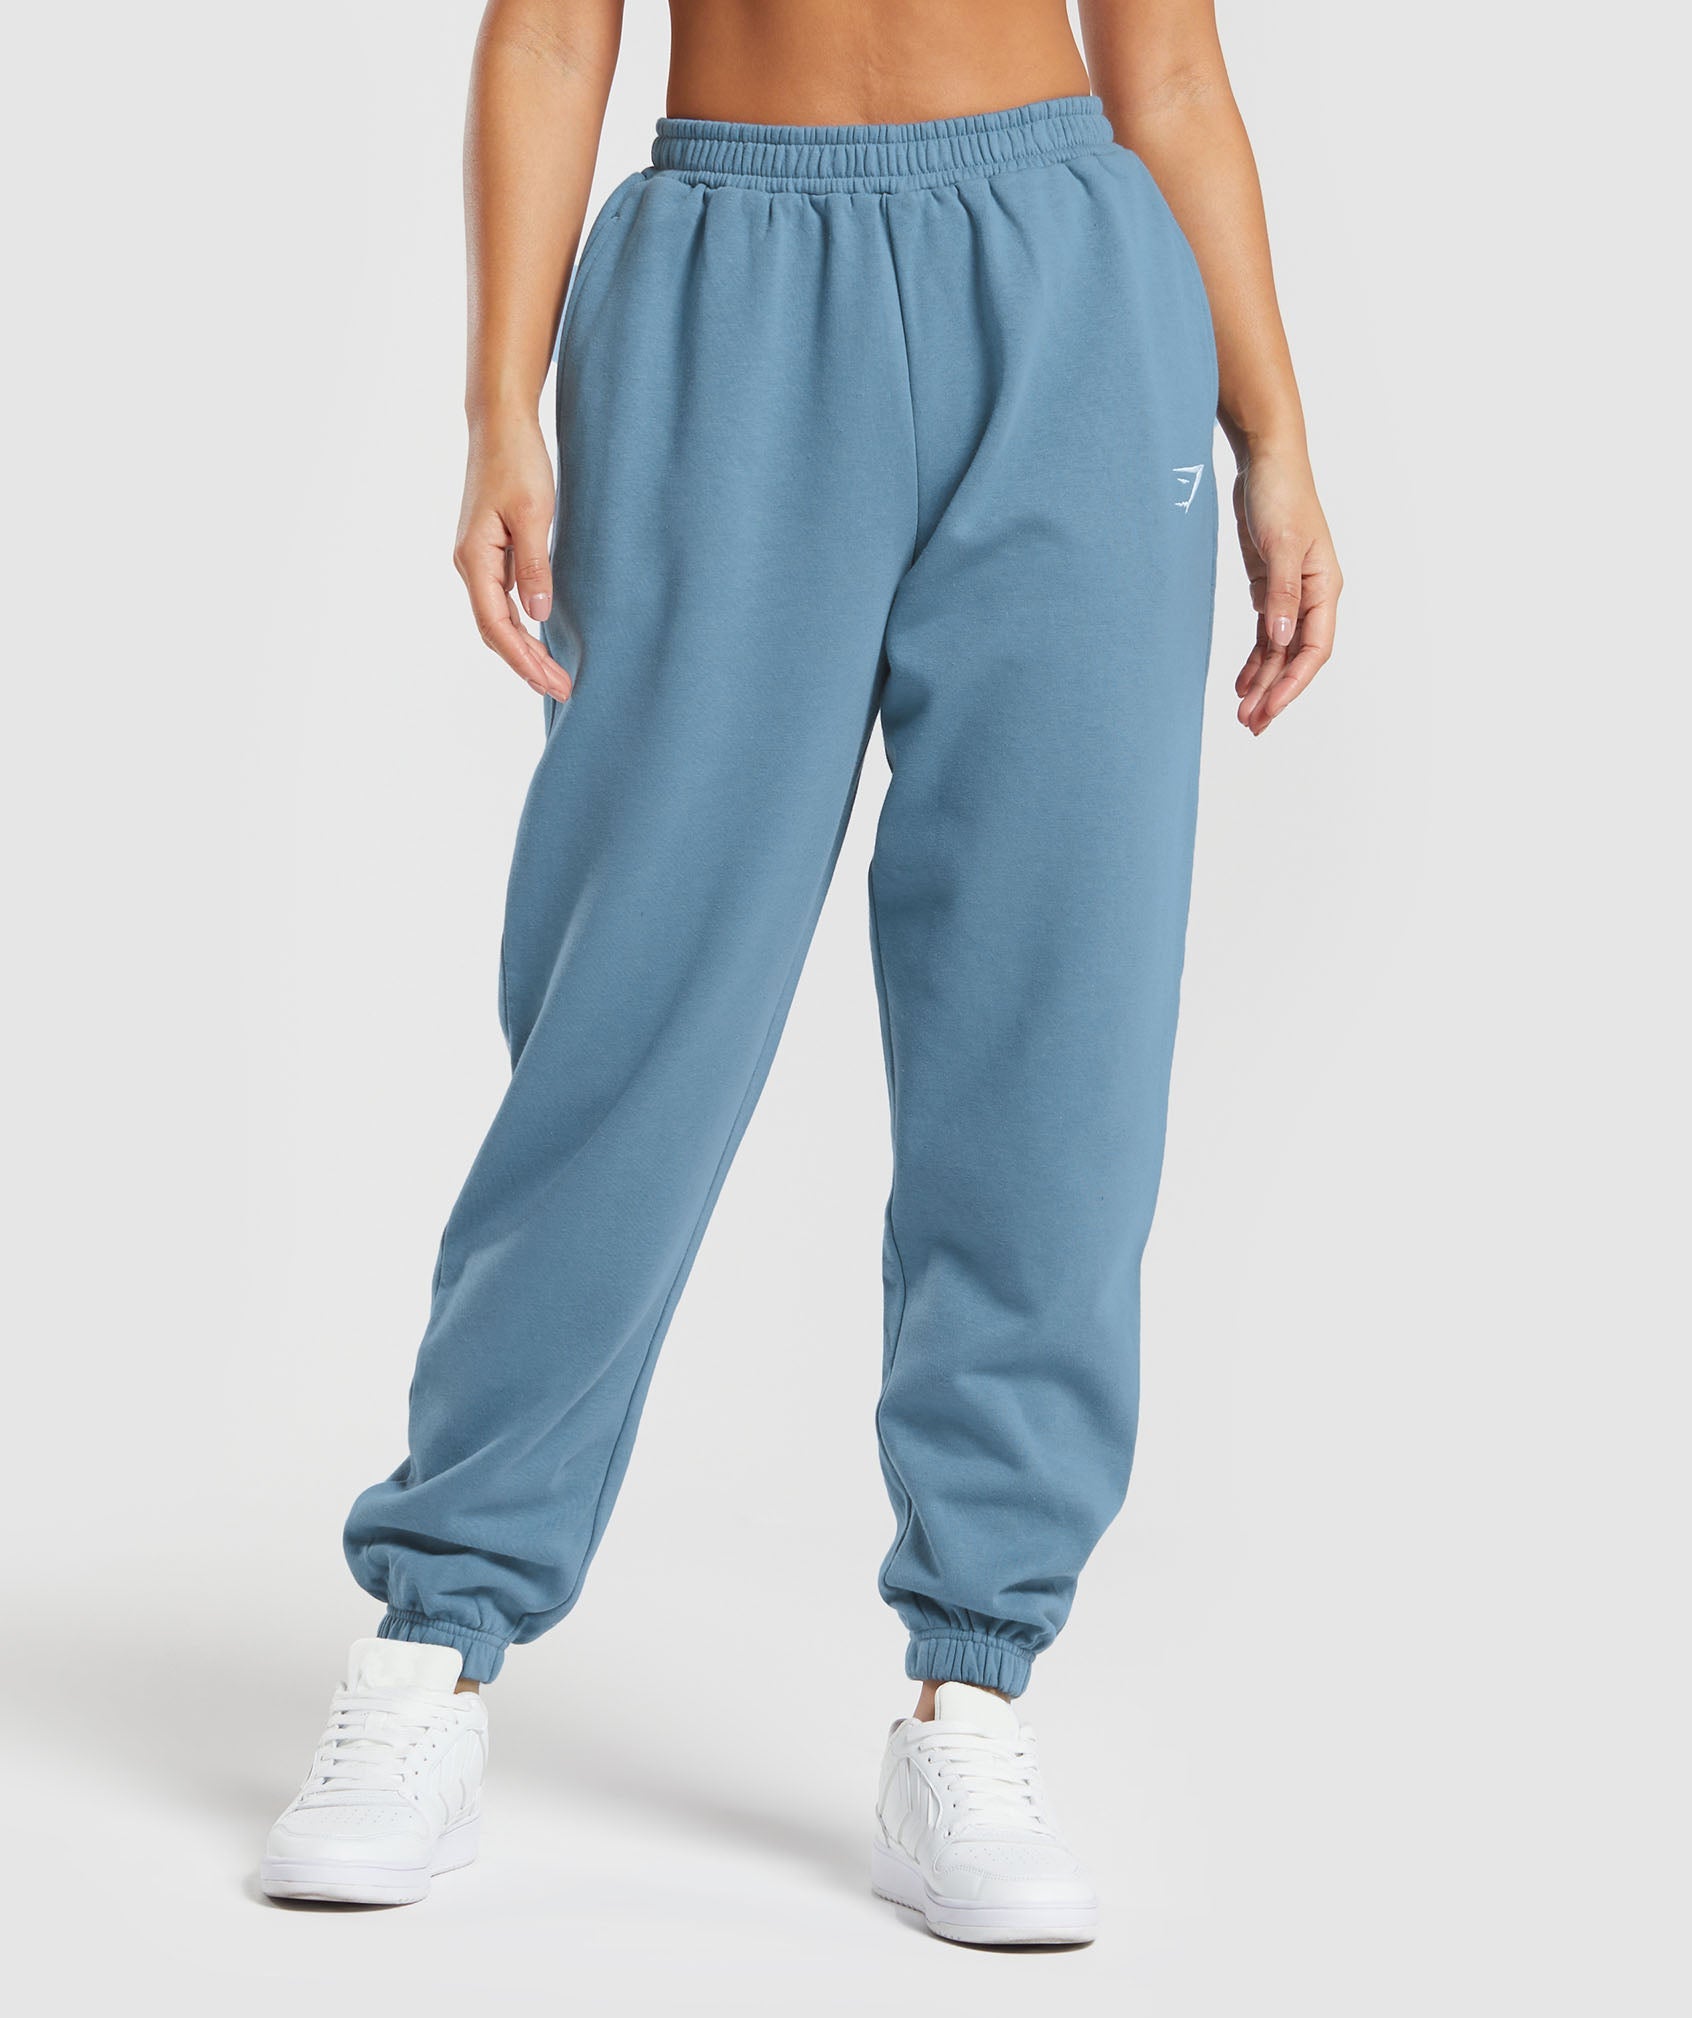 Training Fleece Joggers in Faded Blue is out of stock